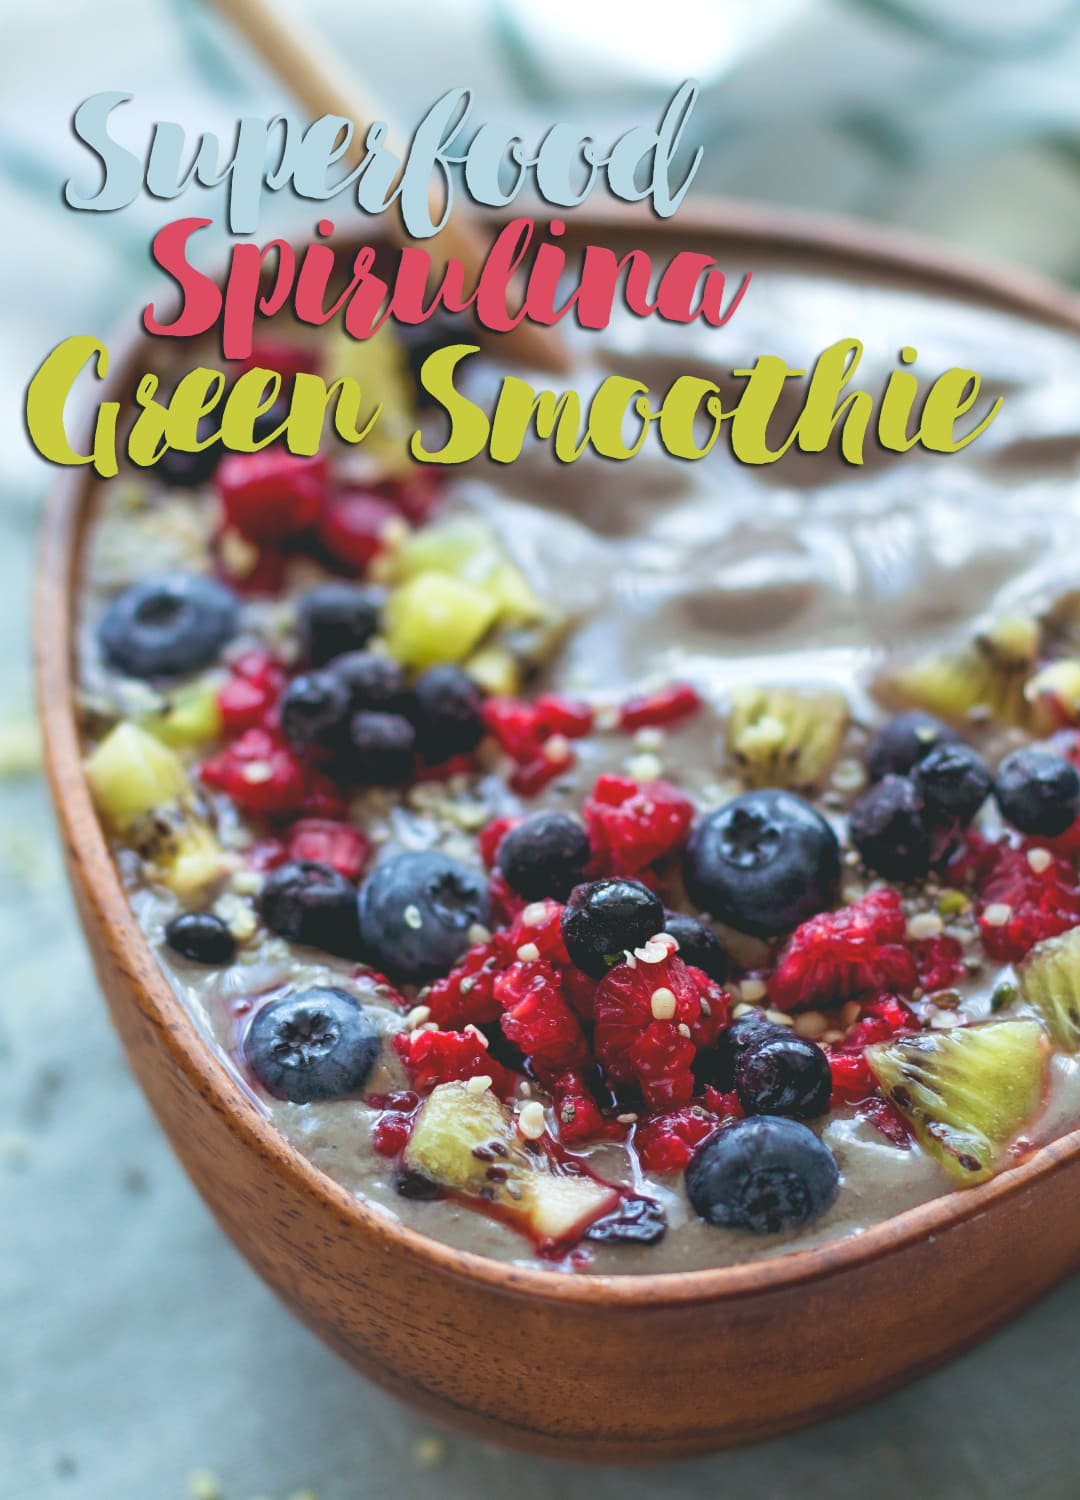 Superfood Spirulina Green Smoothie - banana, mango, raspberries, strawberries, coconut water and amazing protein packed spirulina powder. You'll love this smoothie! Easy to make, really tasty, and packed with nutrients! | thehealthfulideas.com